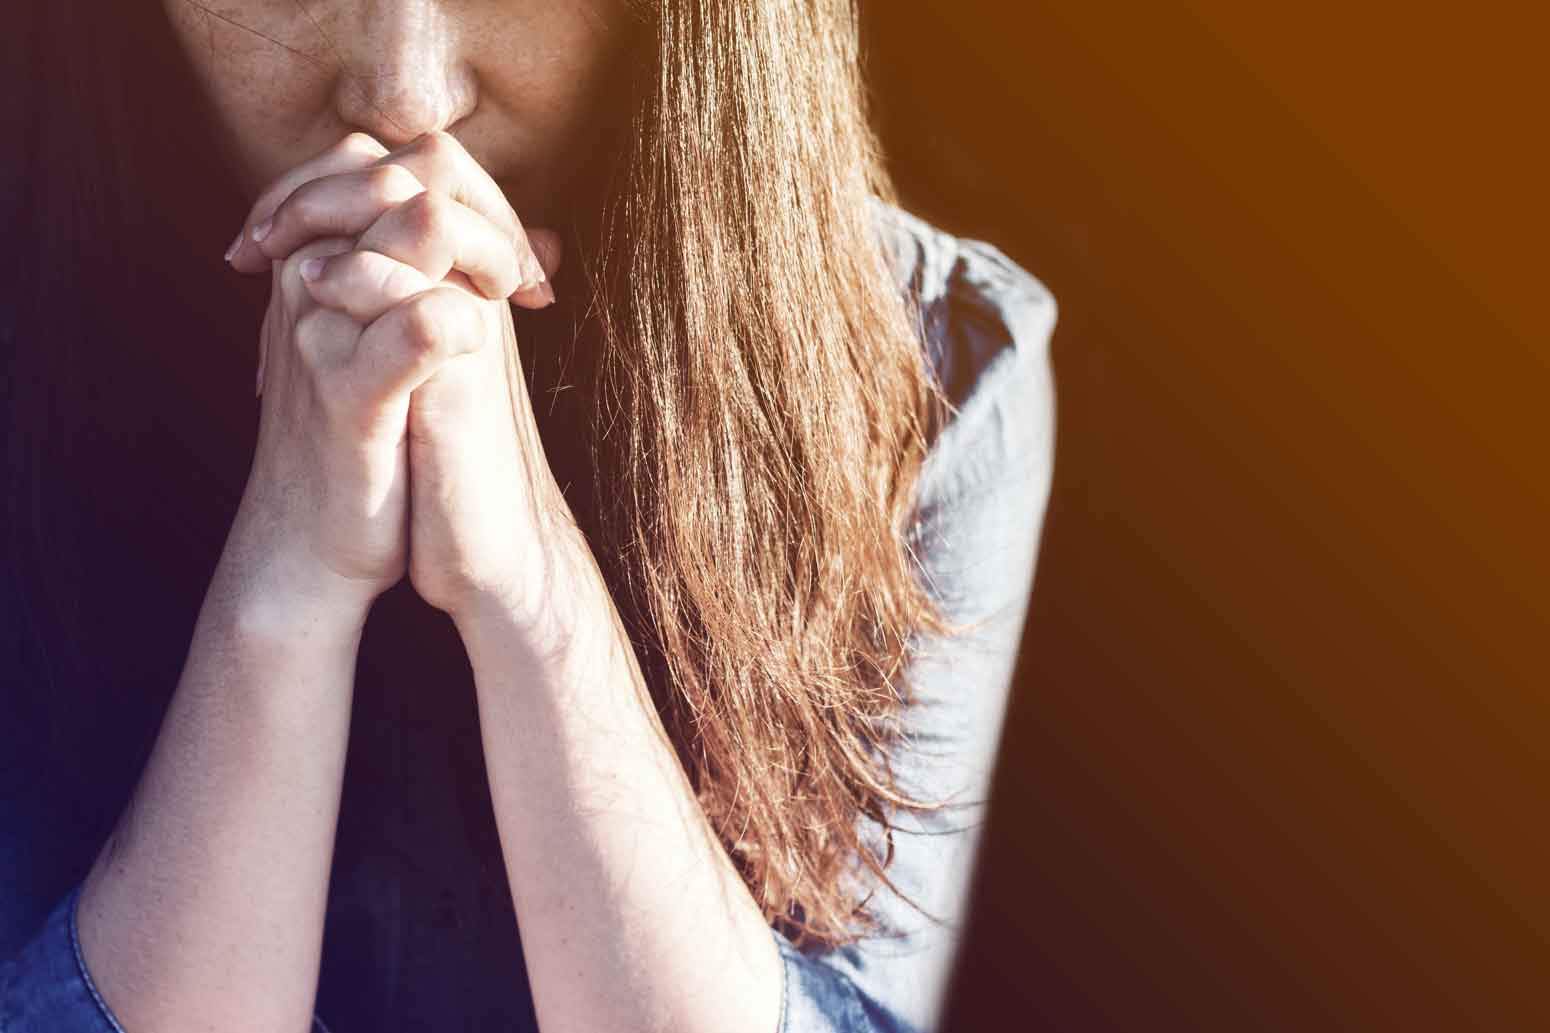 How to Pray (When You Feel Like You Don't Know How)